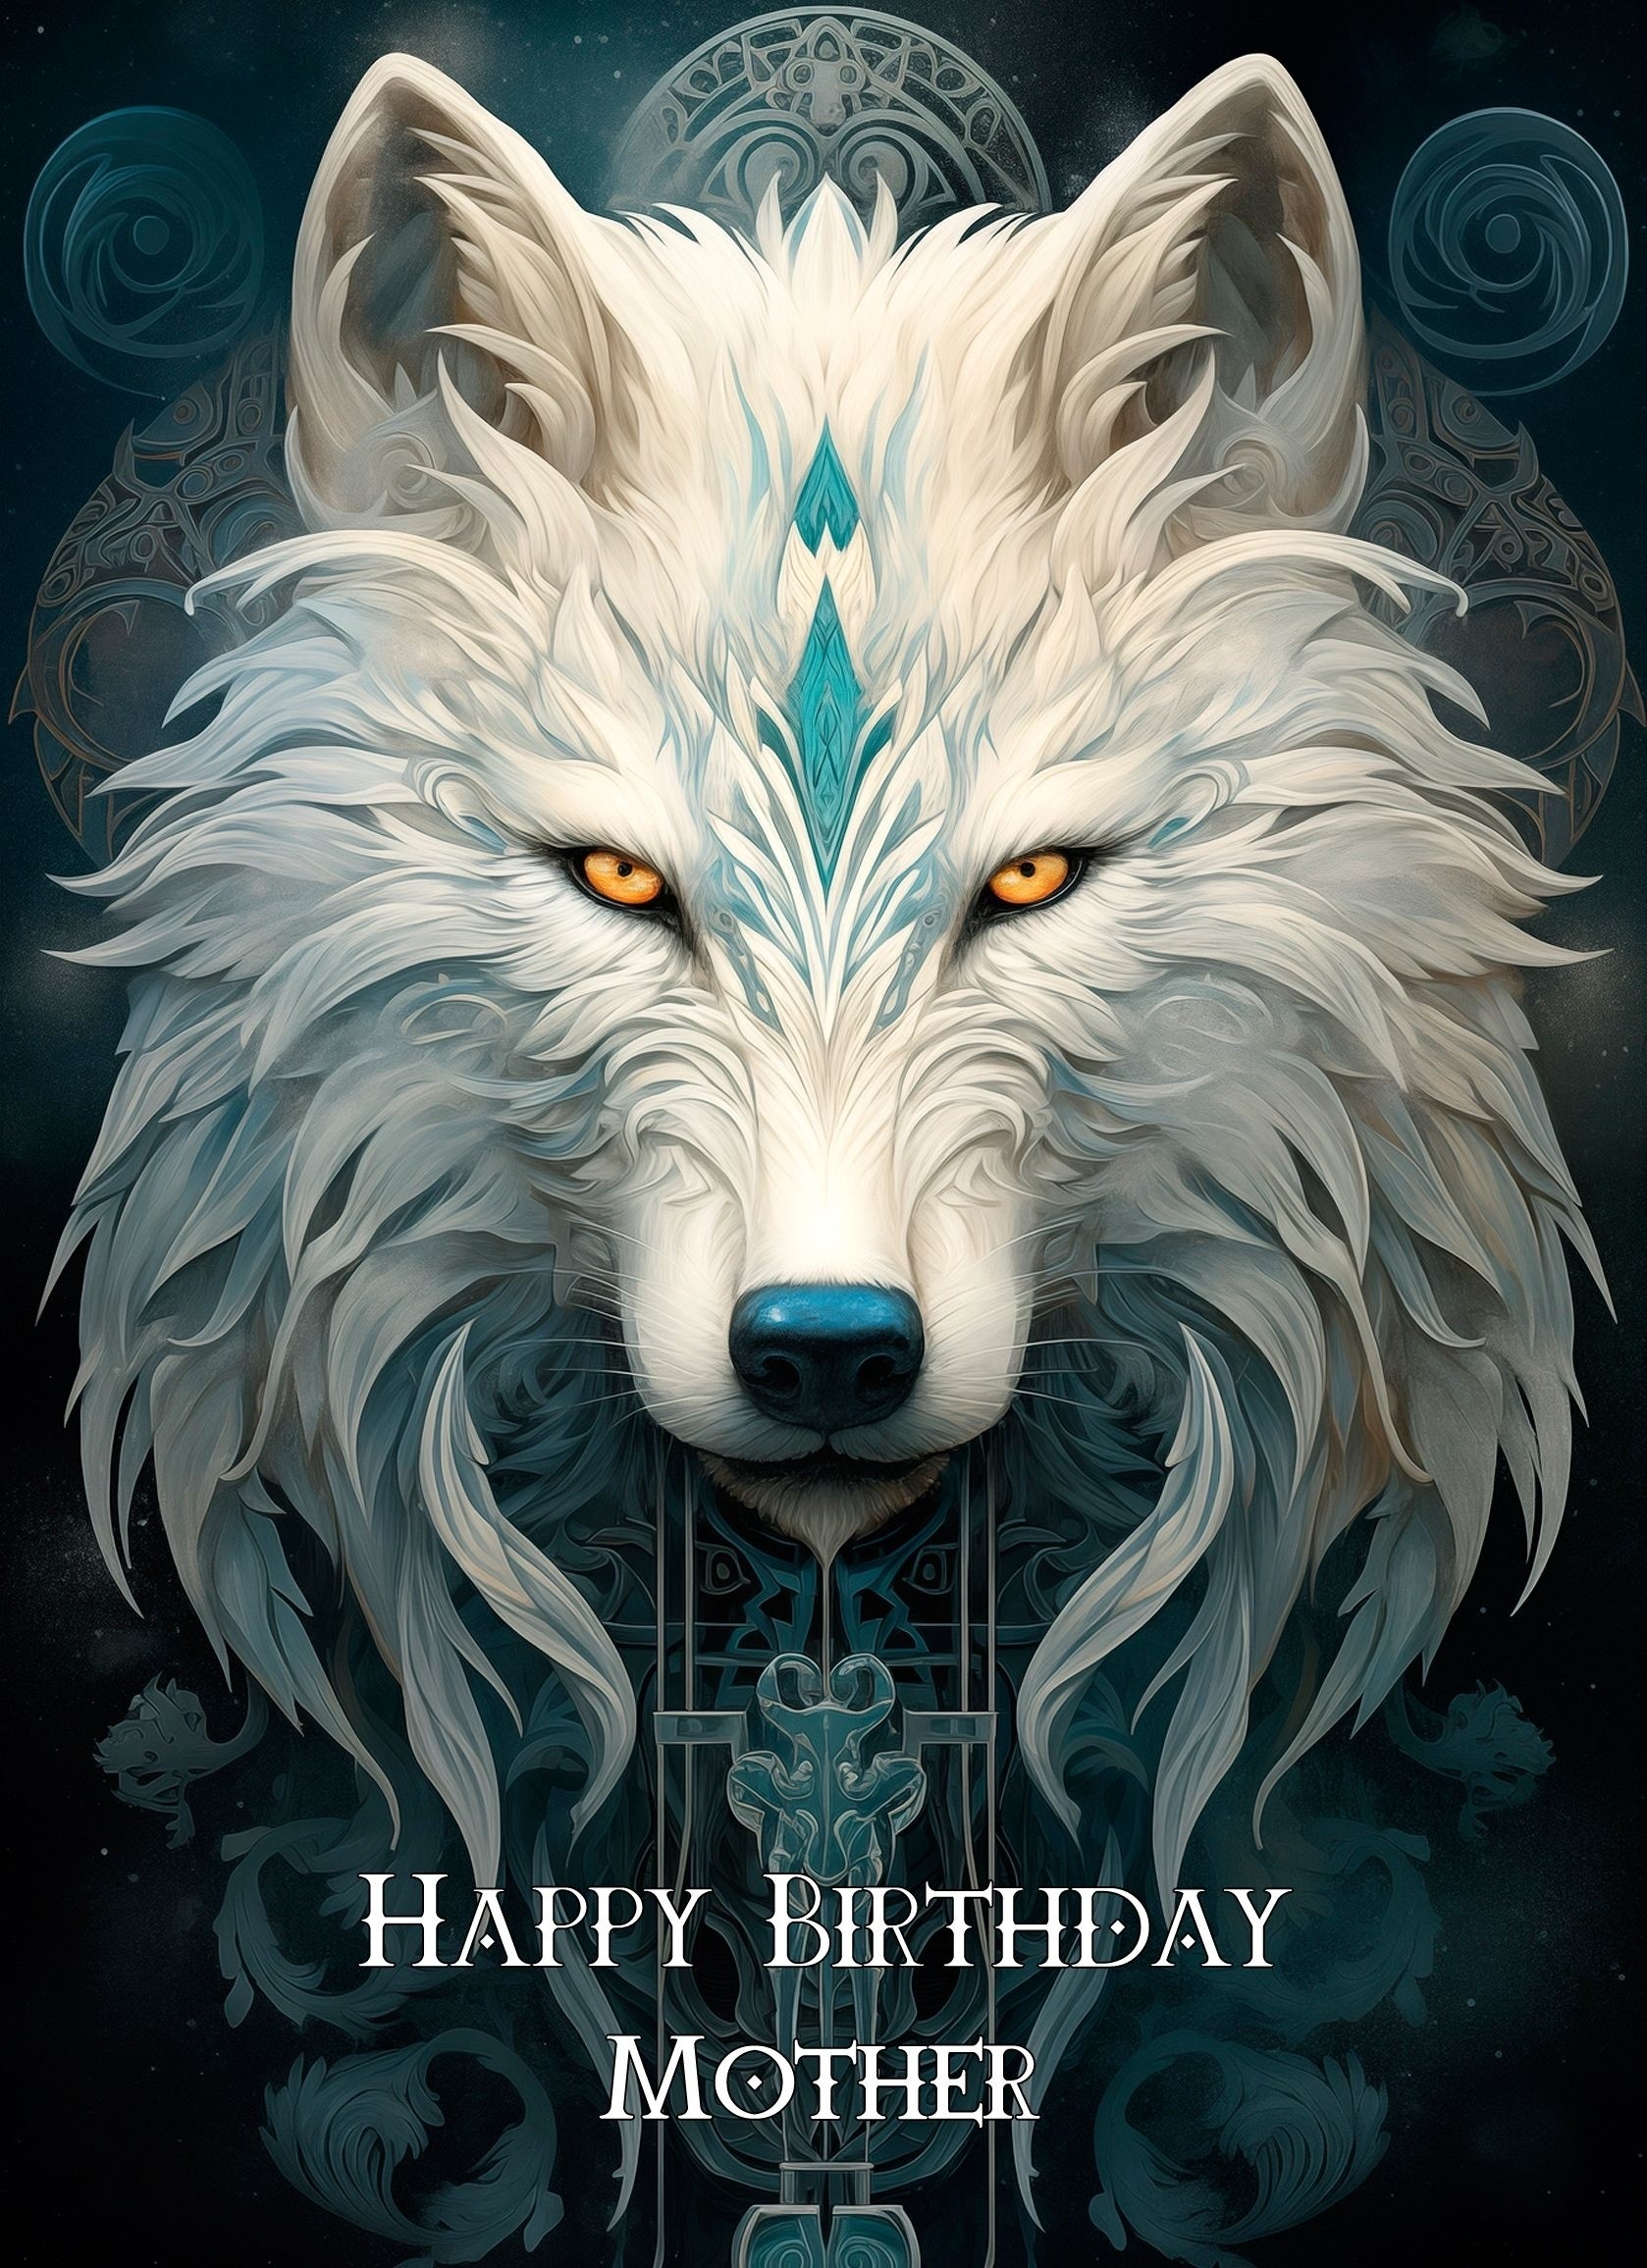 Tribal Wolf Art Birthday Card For Mother (Design 1)